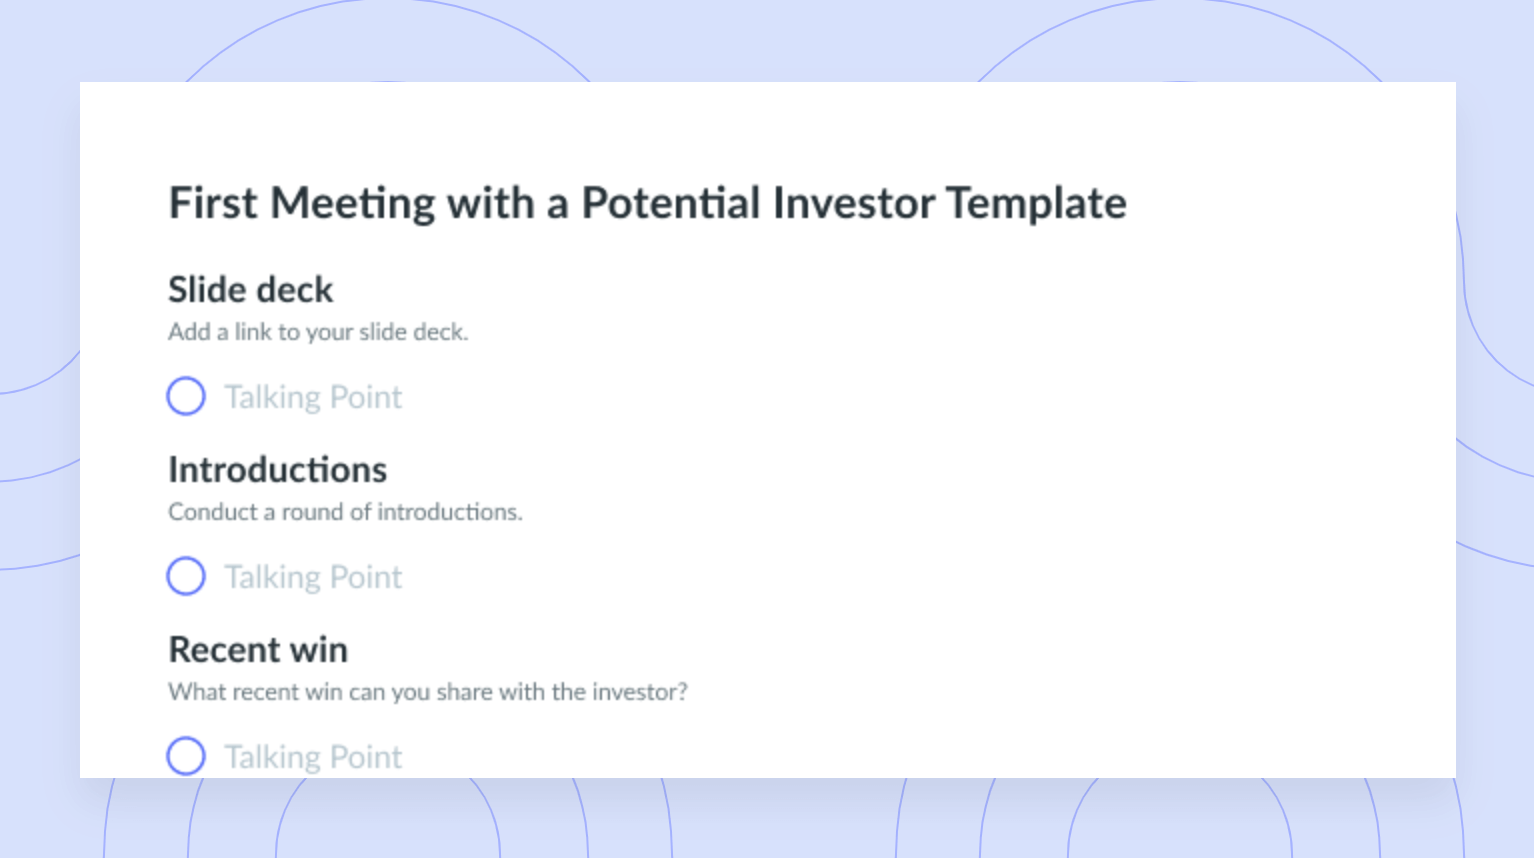 First Meeting with a Potential Investor Template